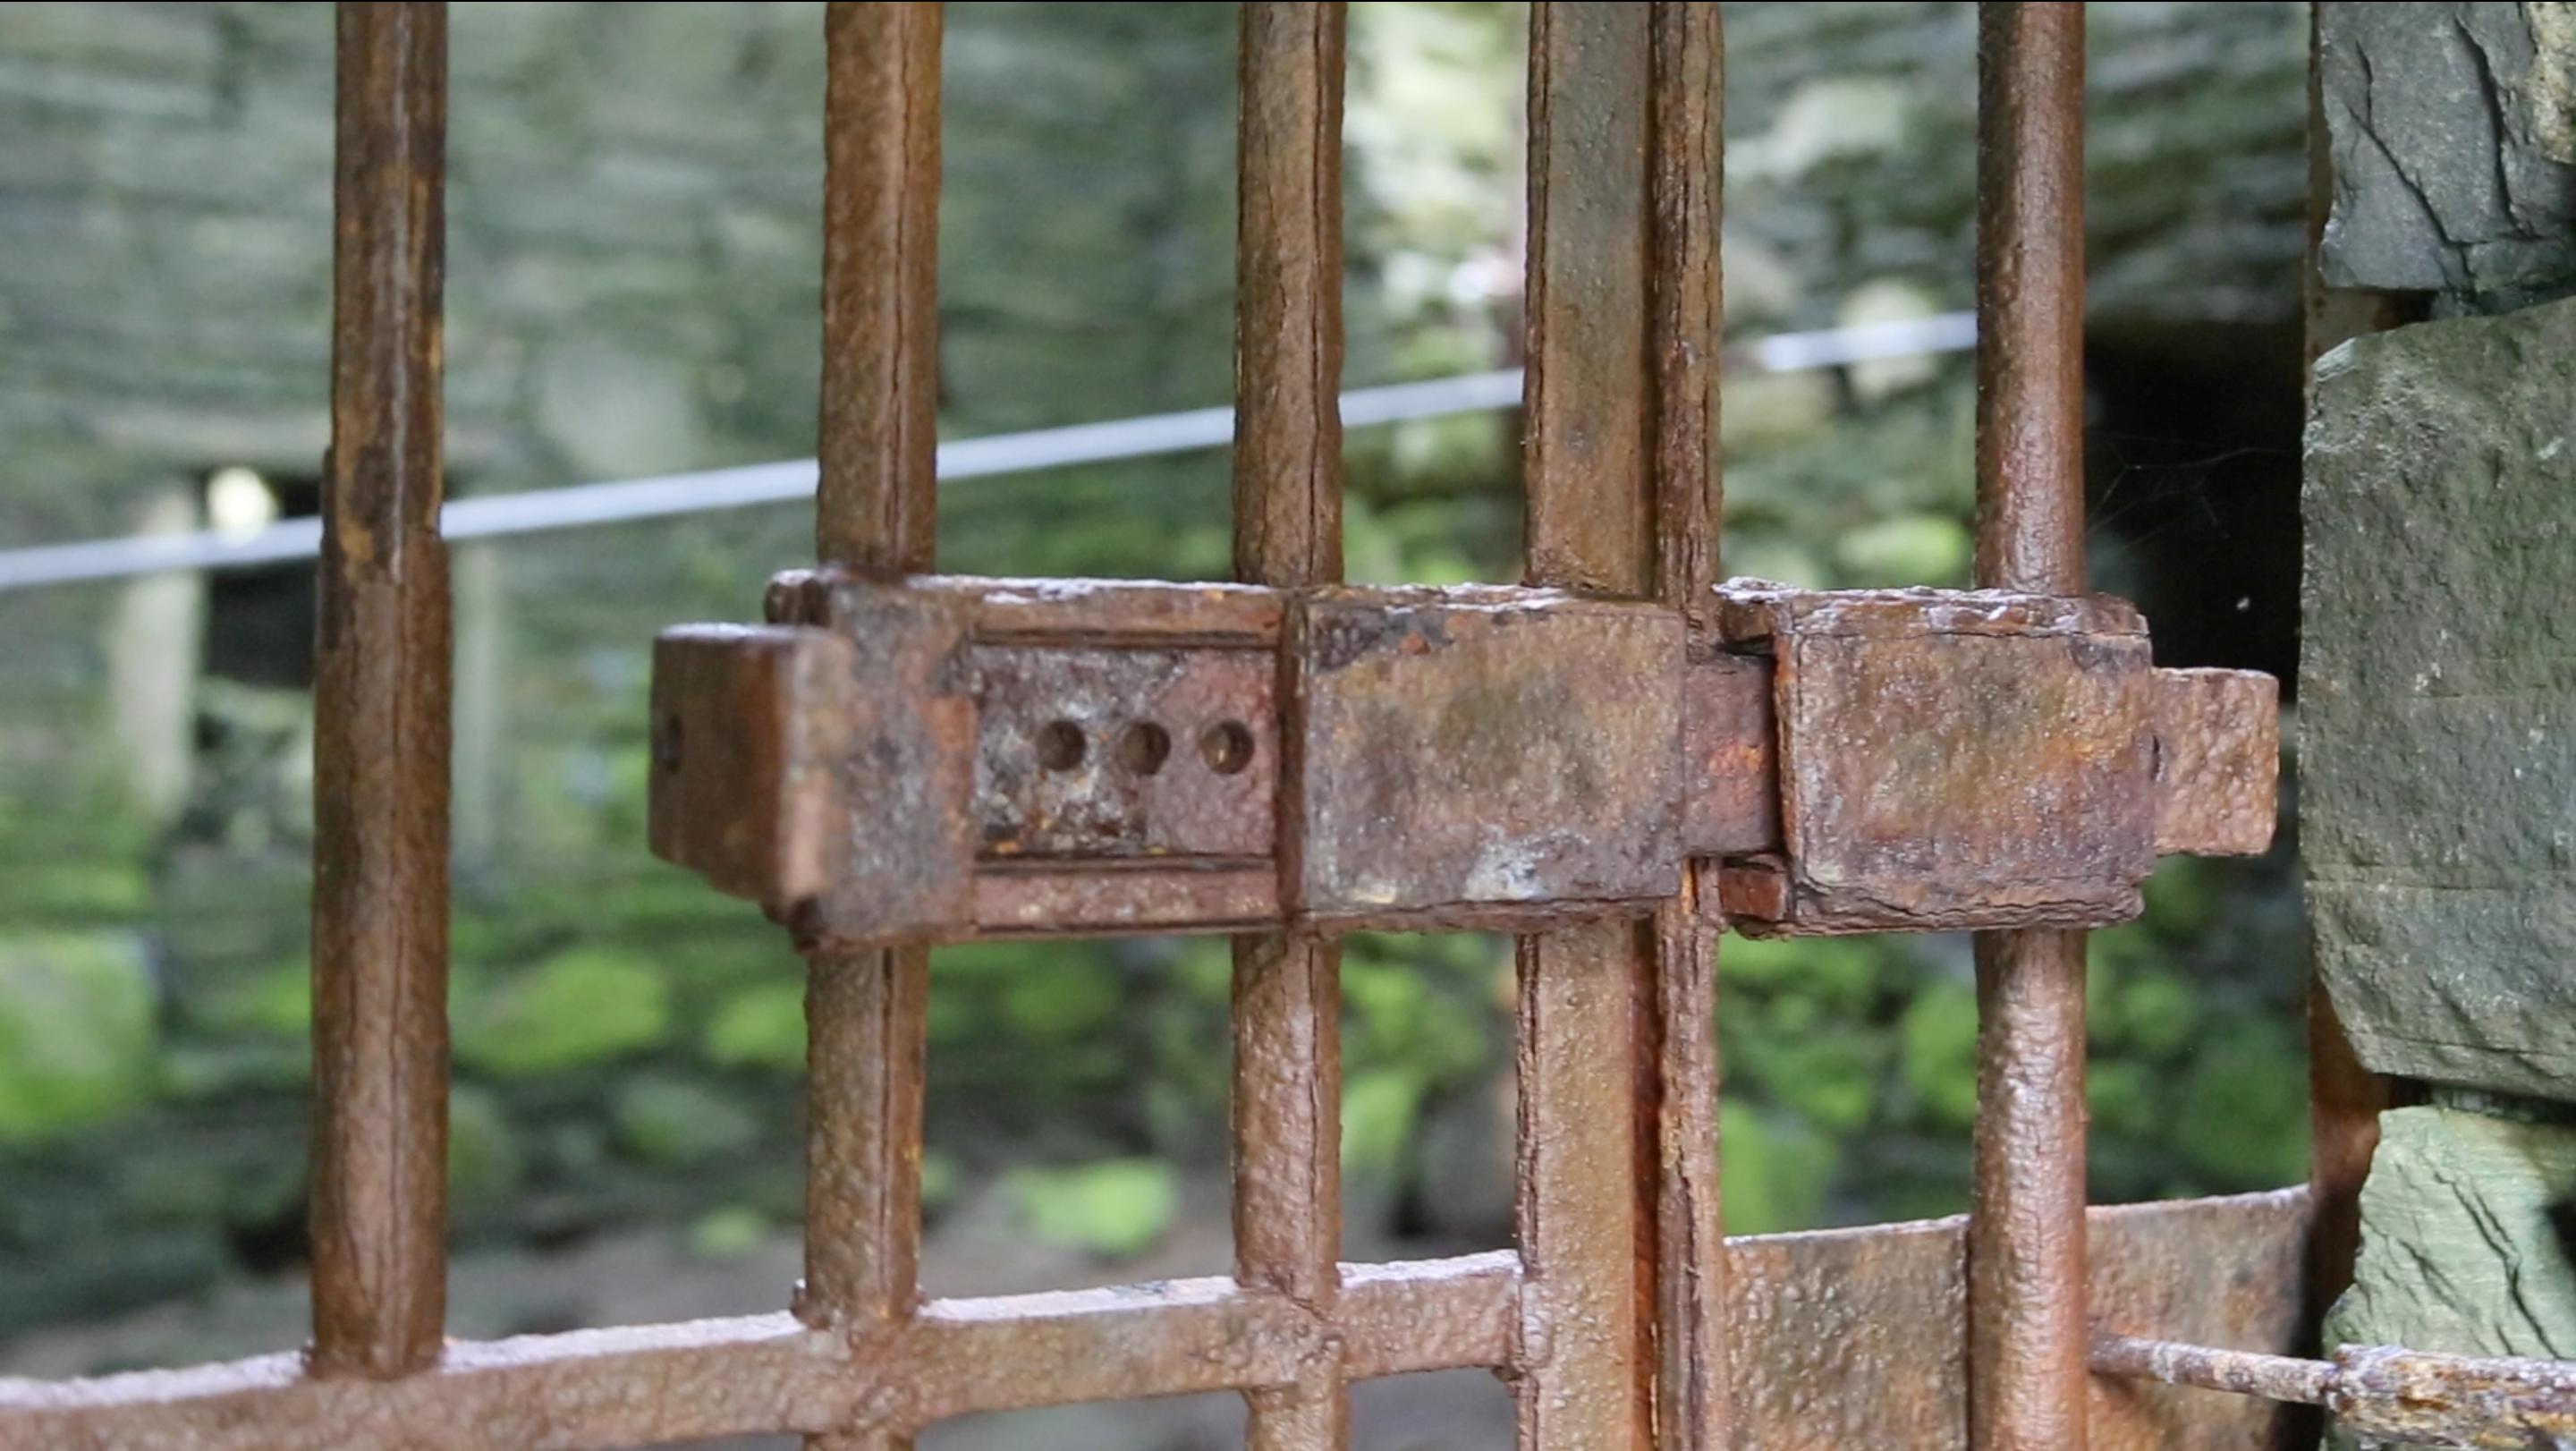 There was an elaborate rusted lock on the gate.